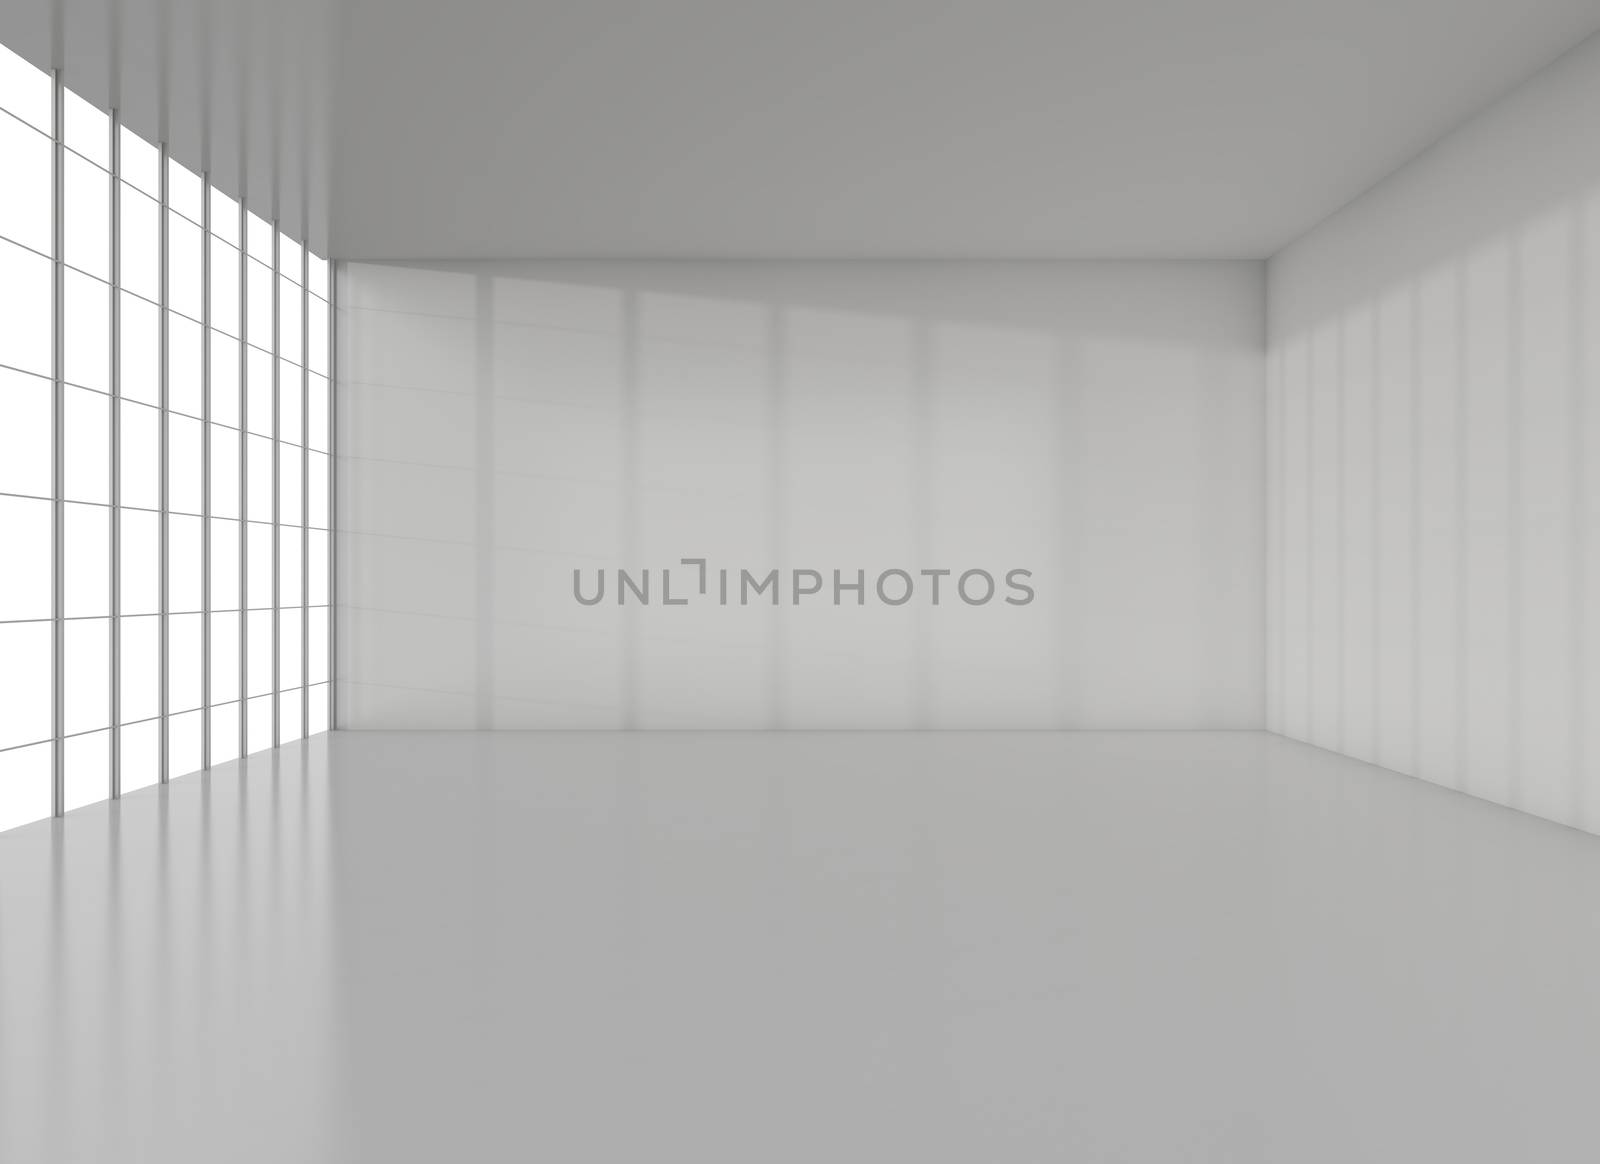 White exhibition room. Reflection floor and big window. 3D rendering